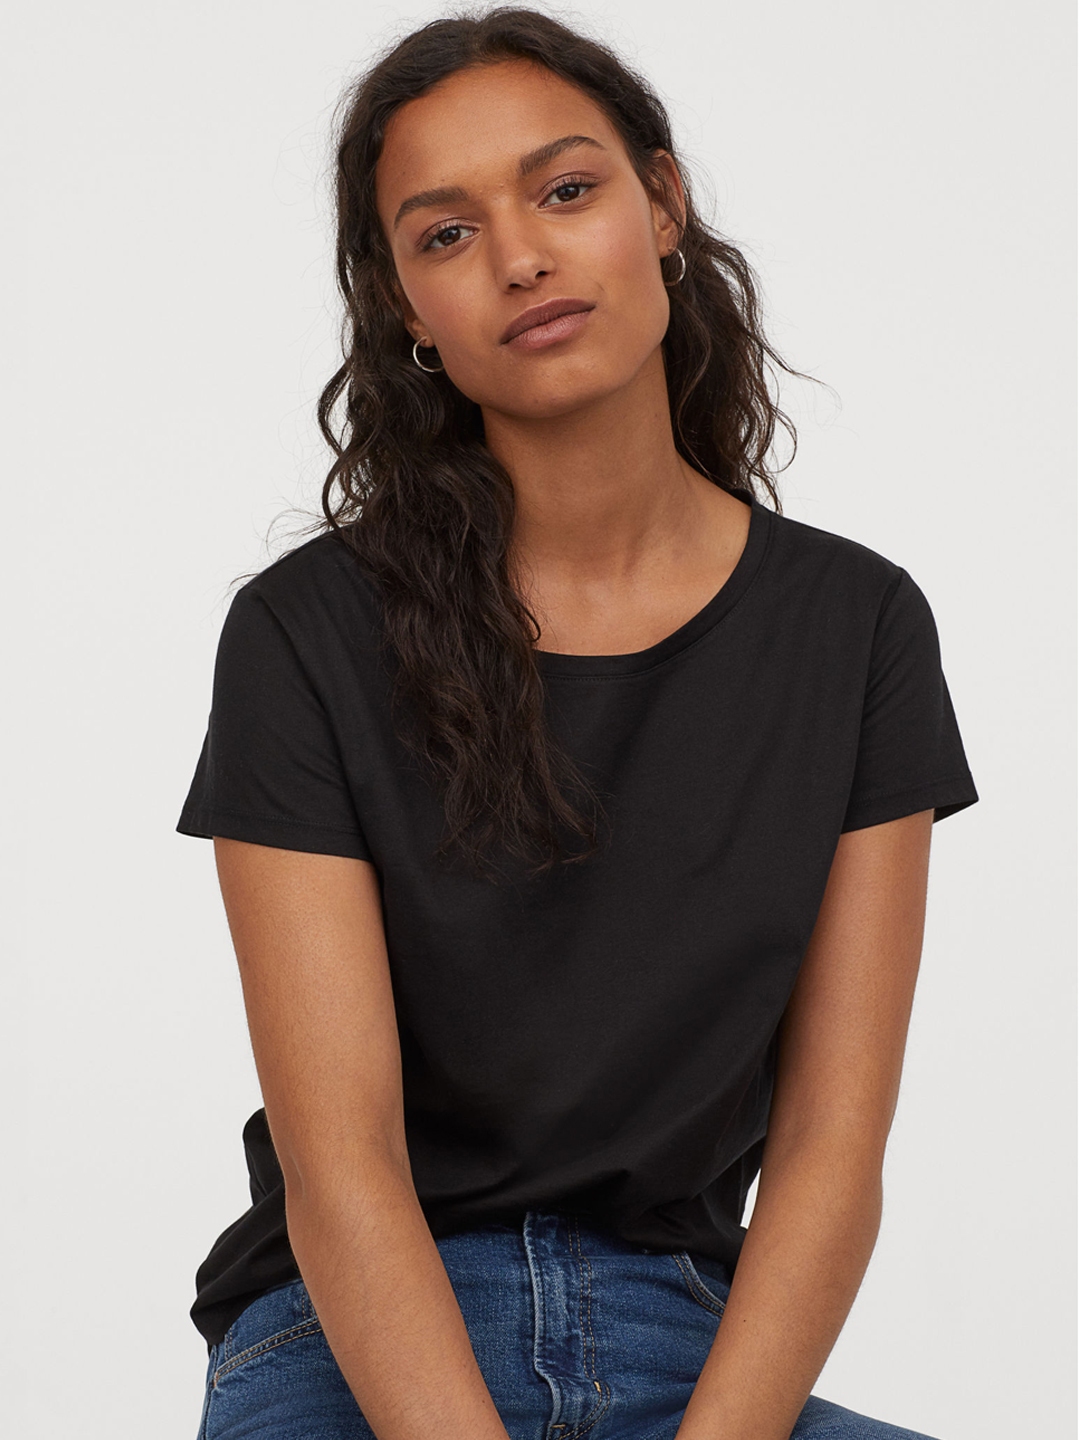 29 Best T-Shirts For Women To Wear On Repeat In 2023